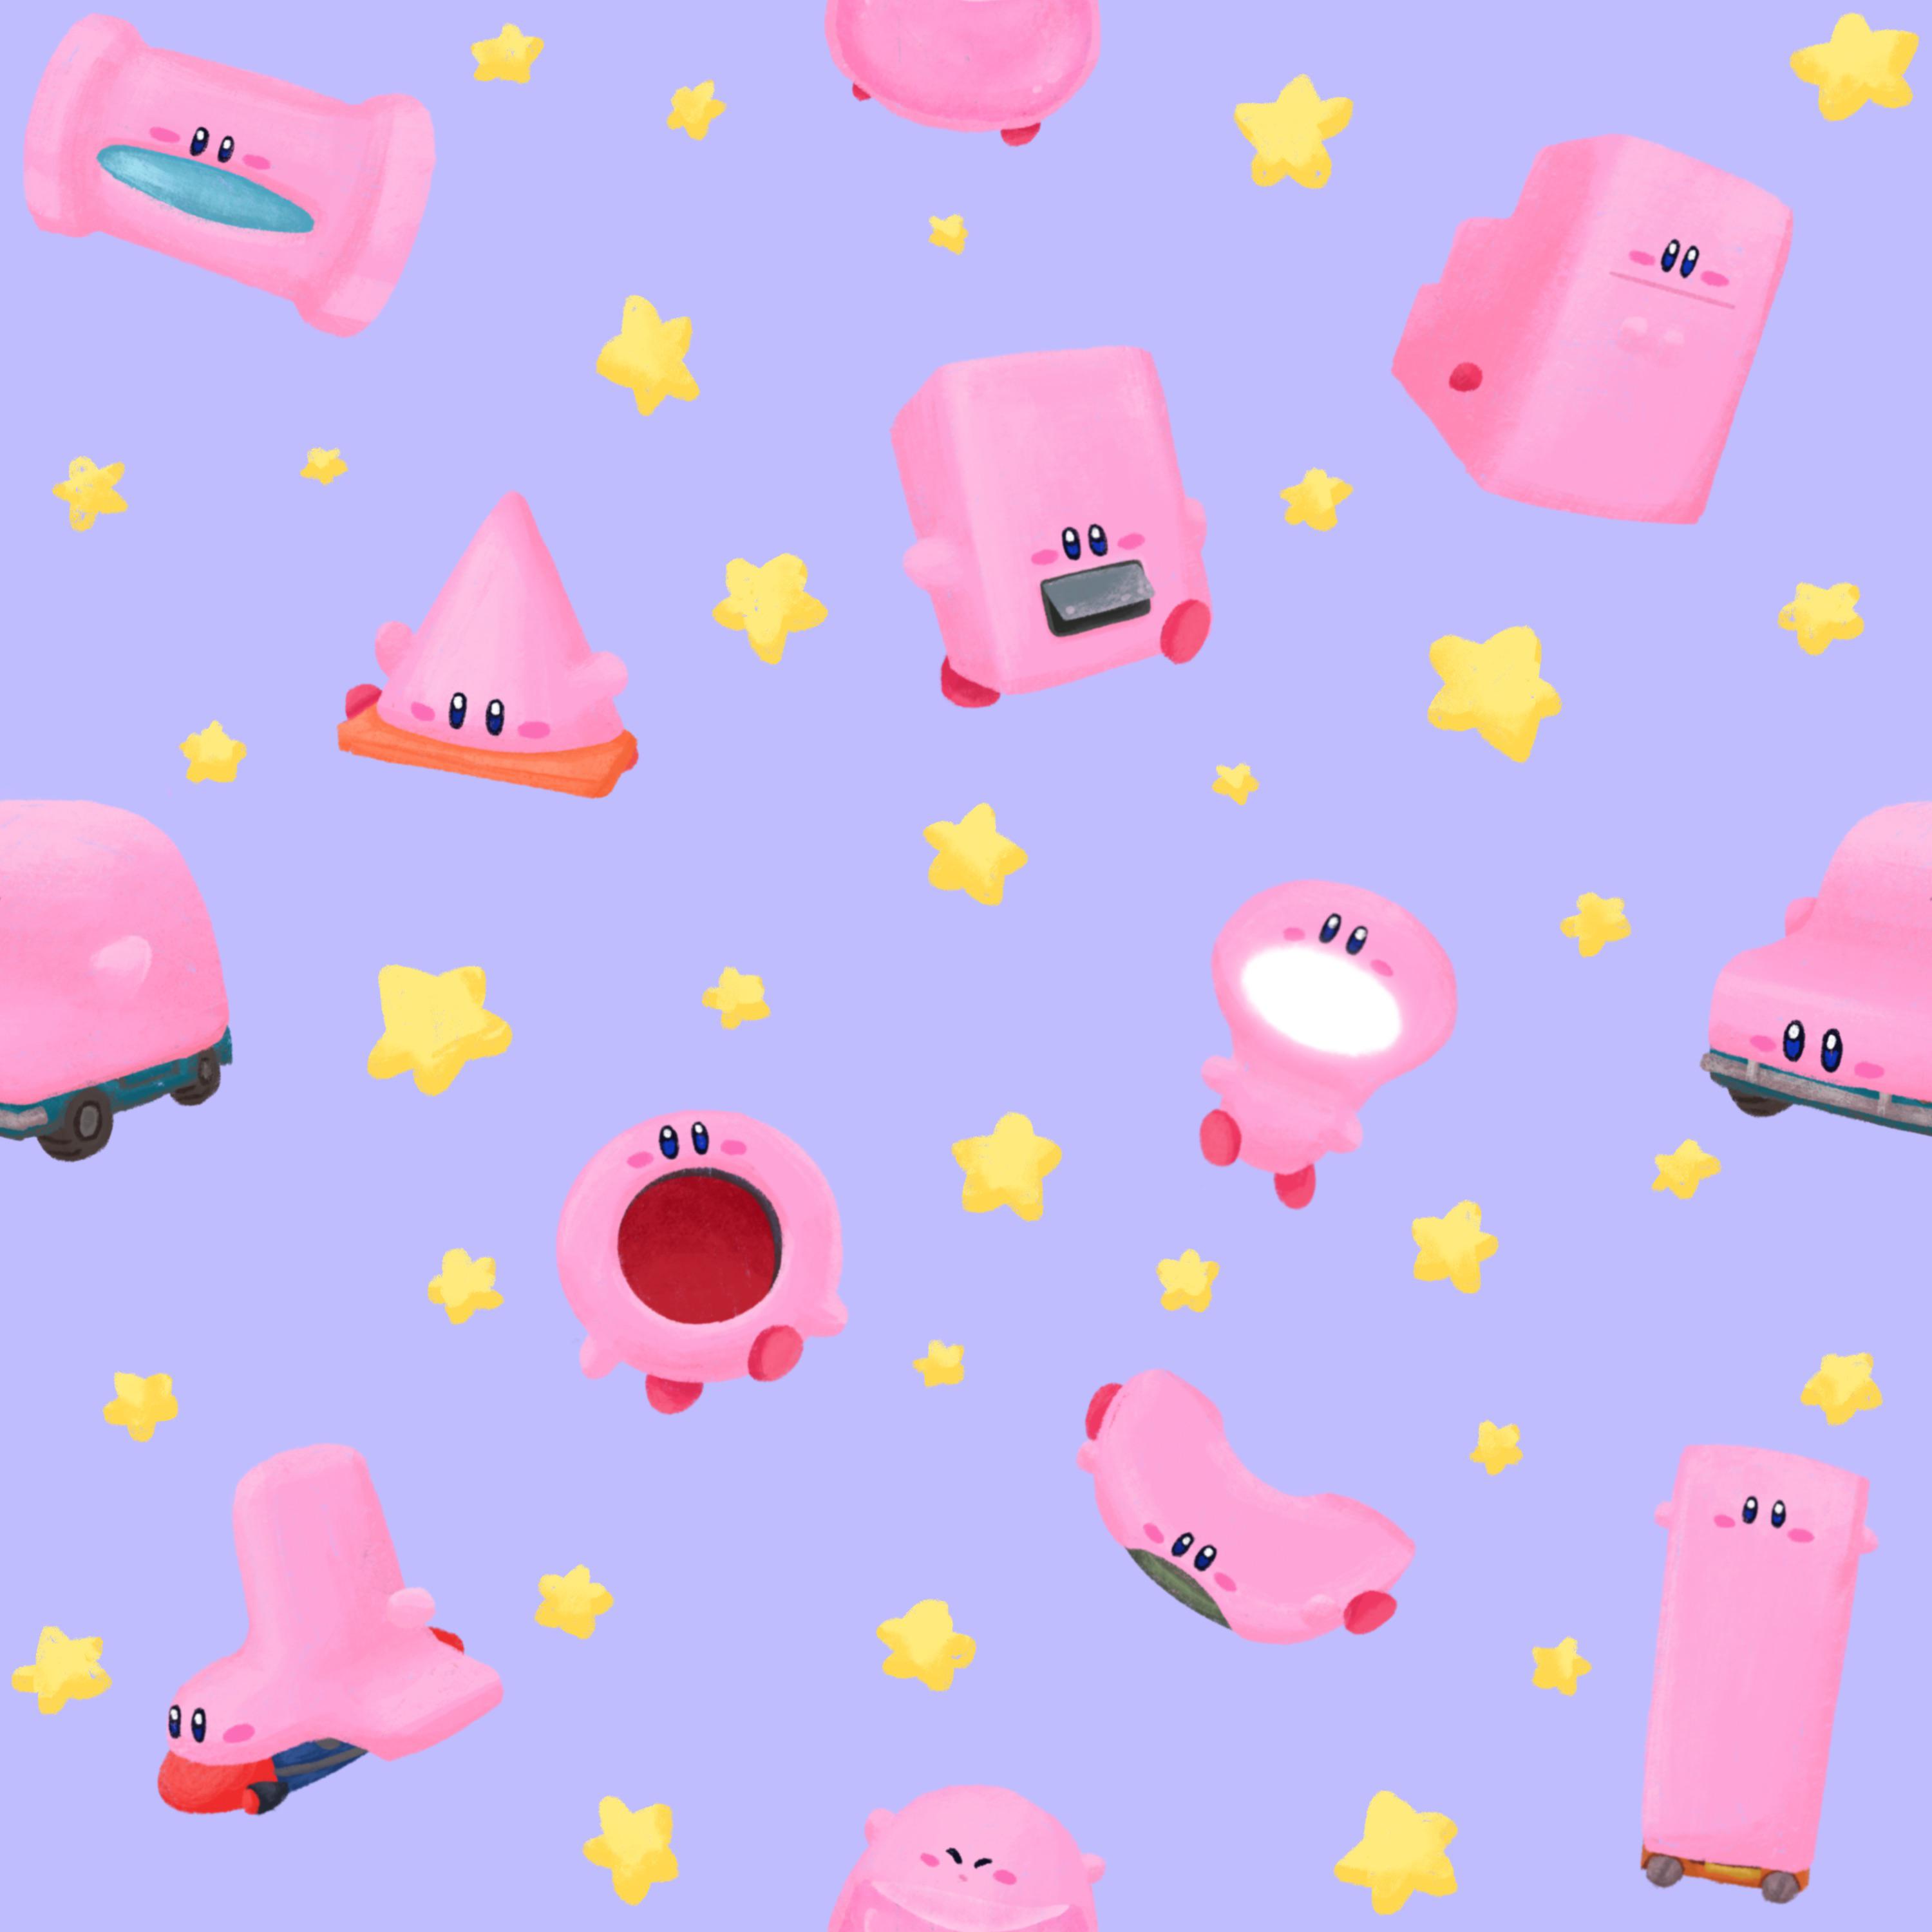 A pattern of pink Kirby characters and yellow stars on a purple background - Kirby